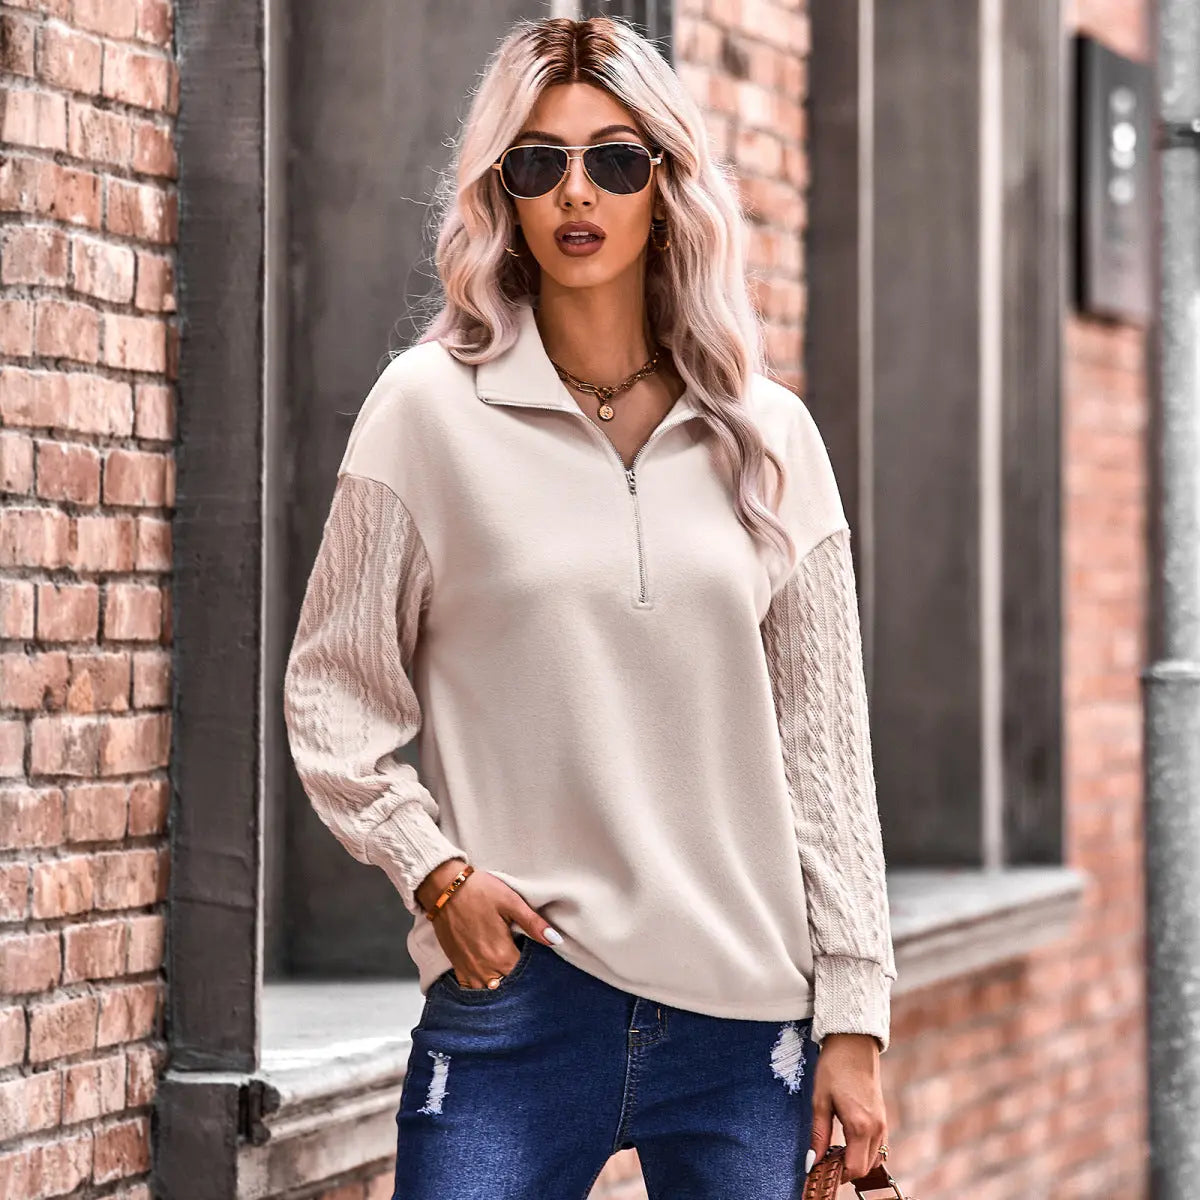 Long Cable Knitted Sleeve Sweatshirts Rite Choice Clothing